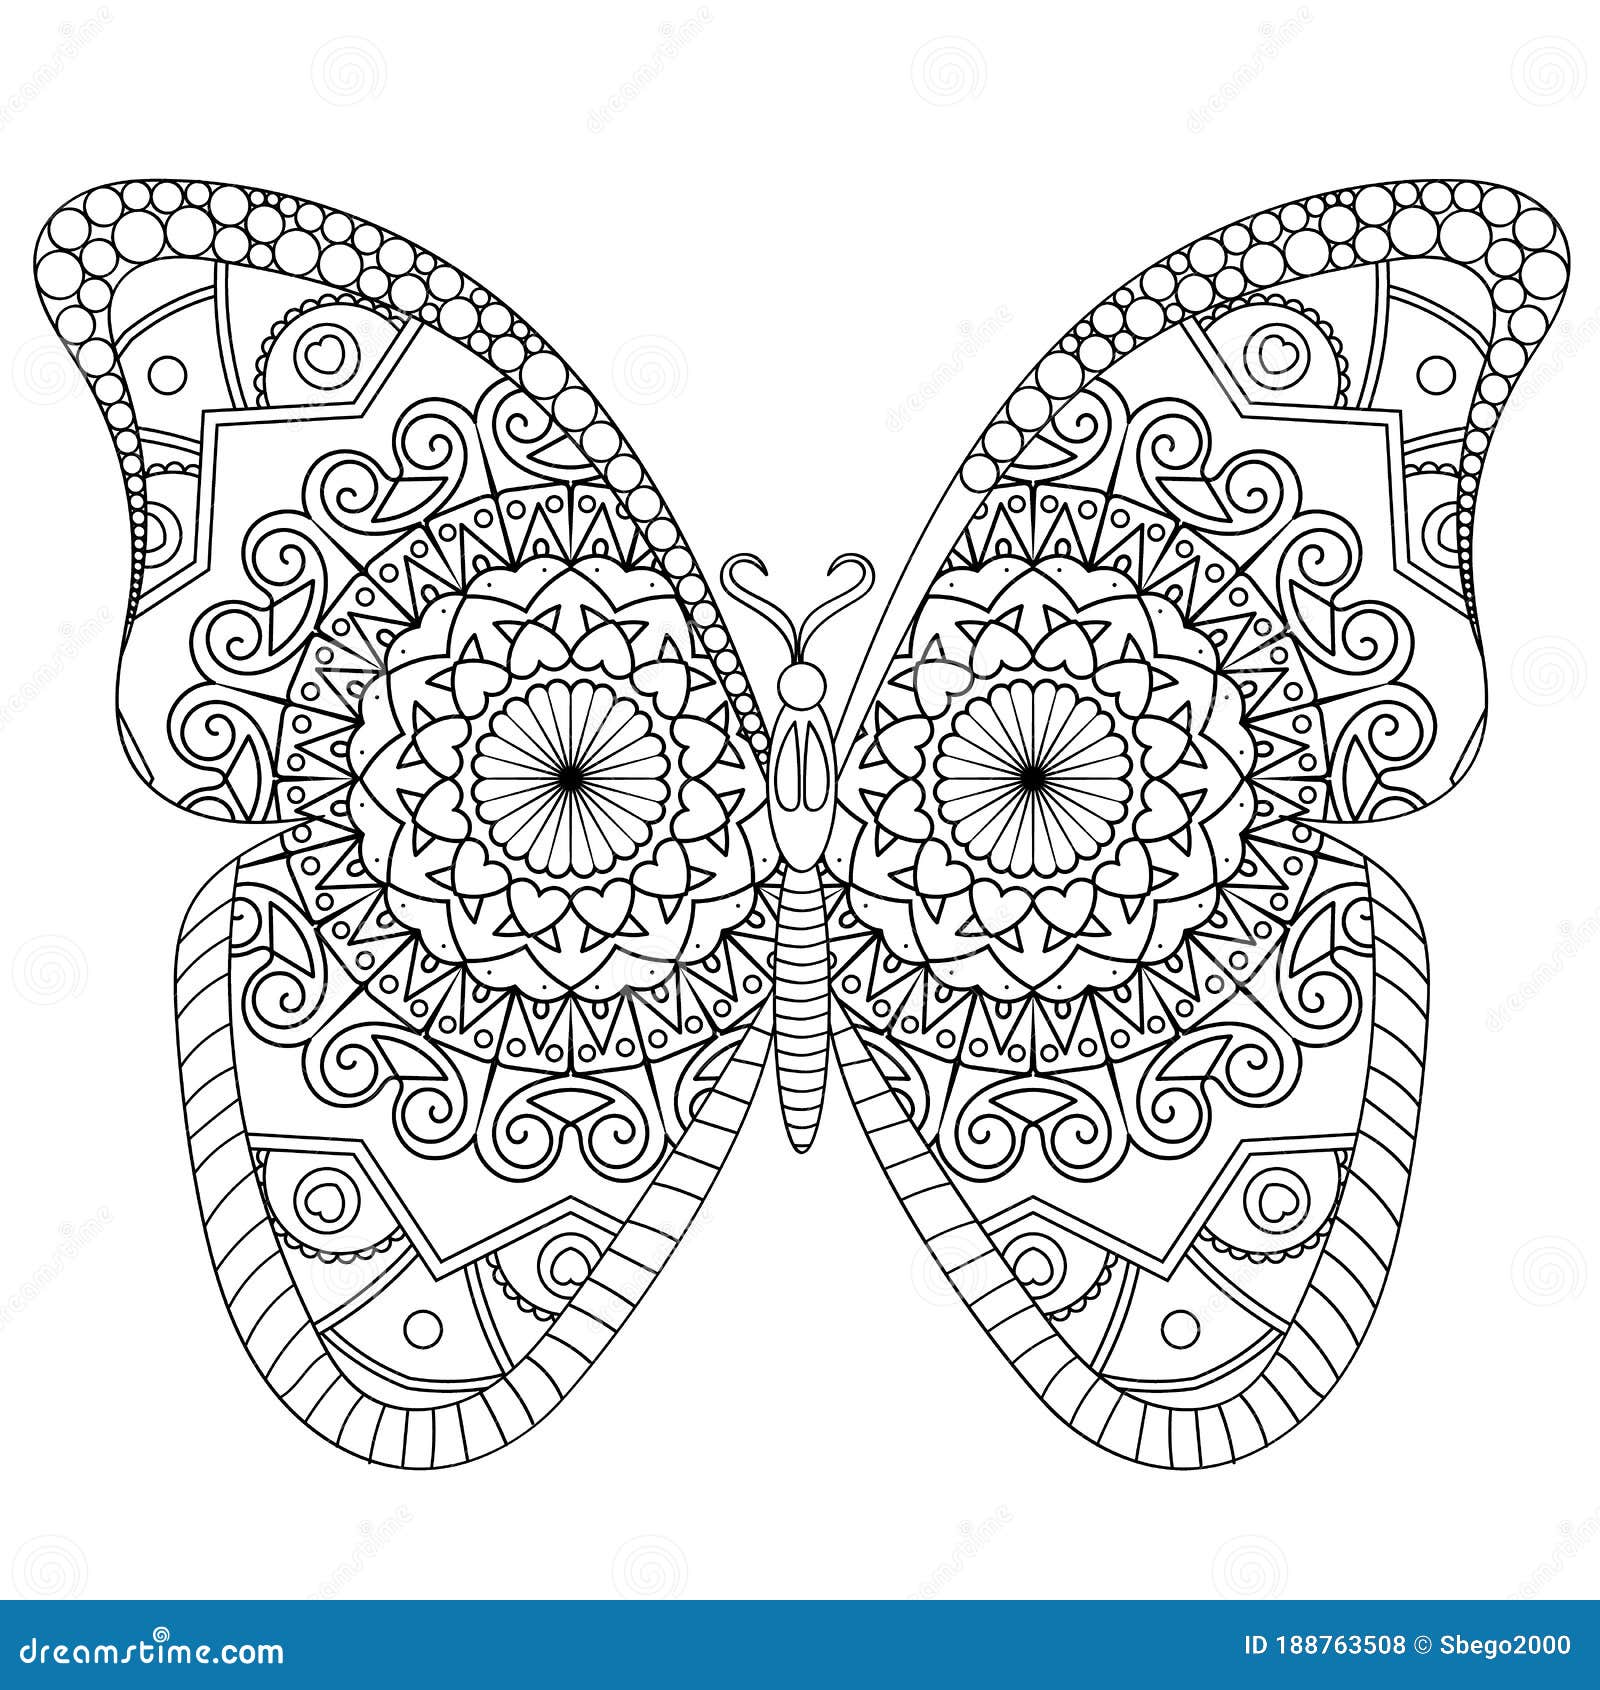 PAPILLONS - COLORIAGES ANTI-STRESS